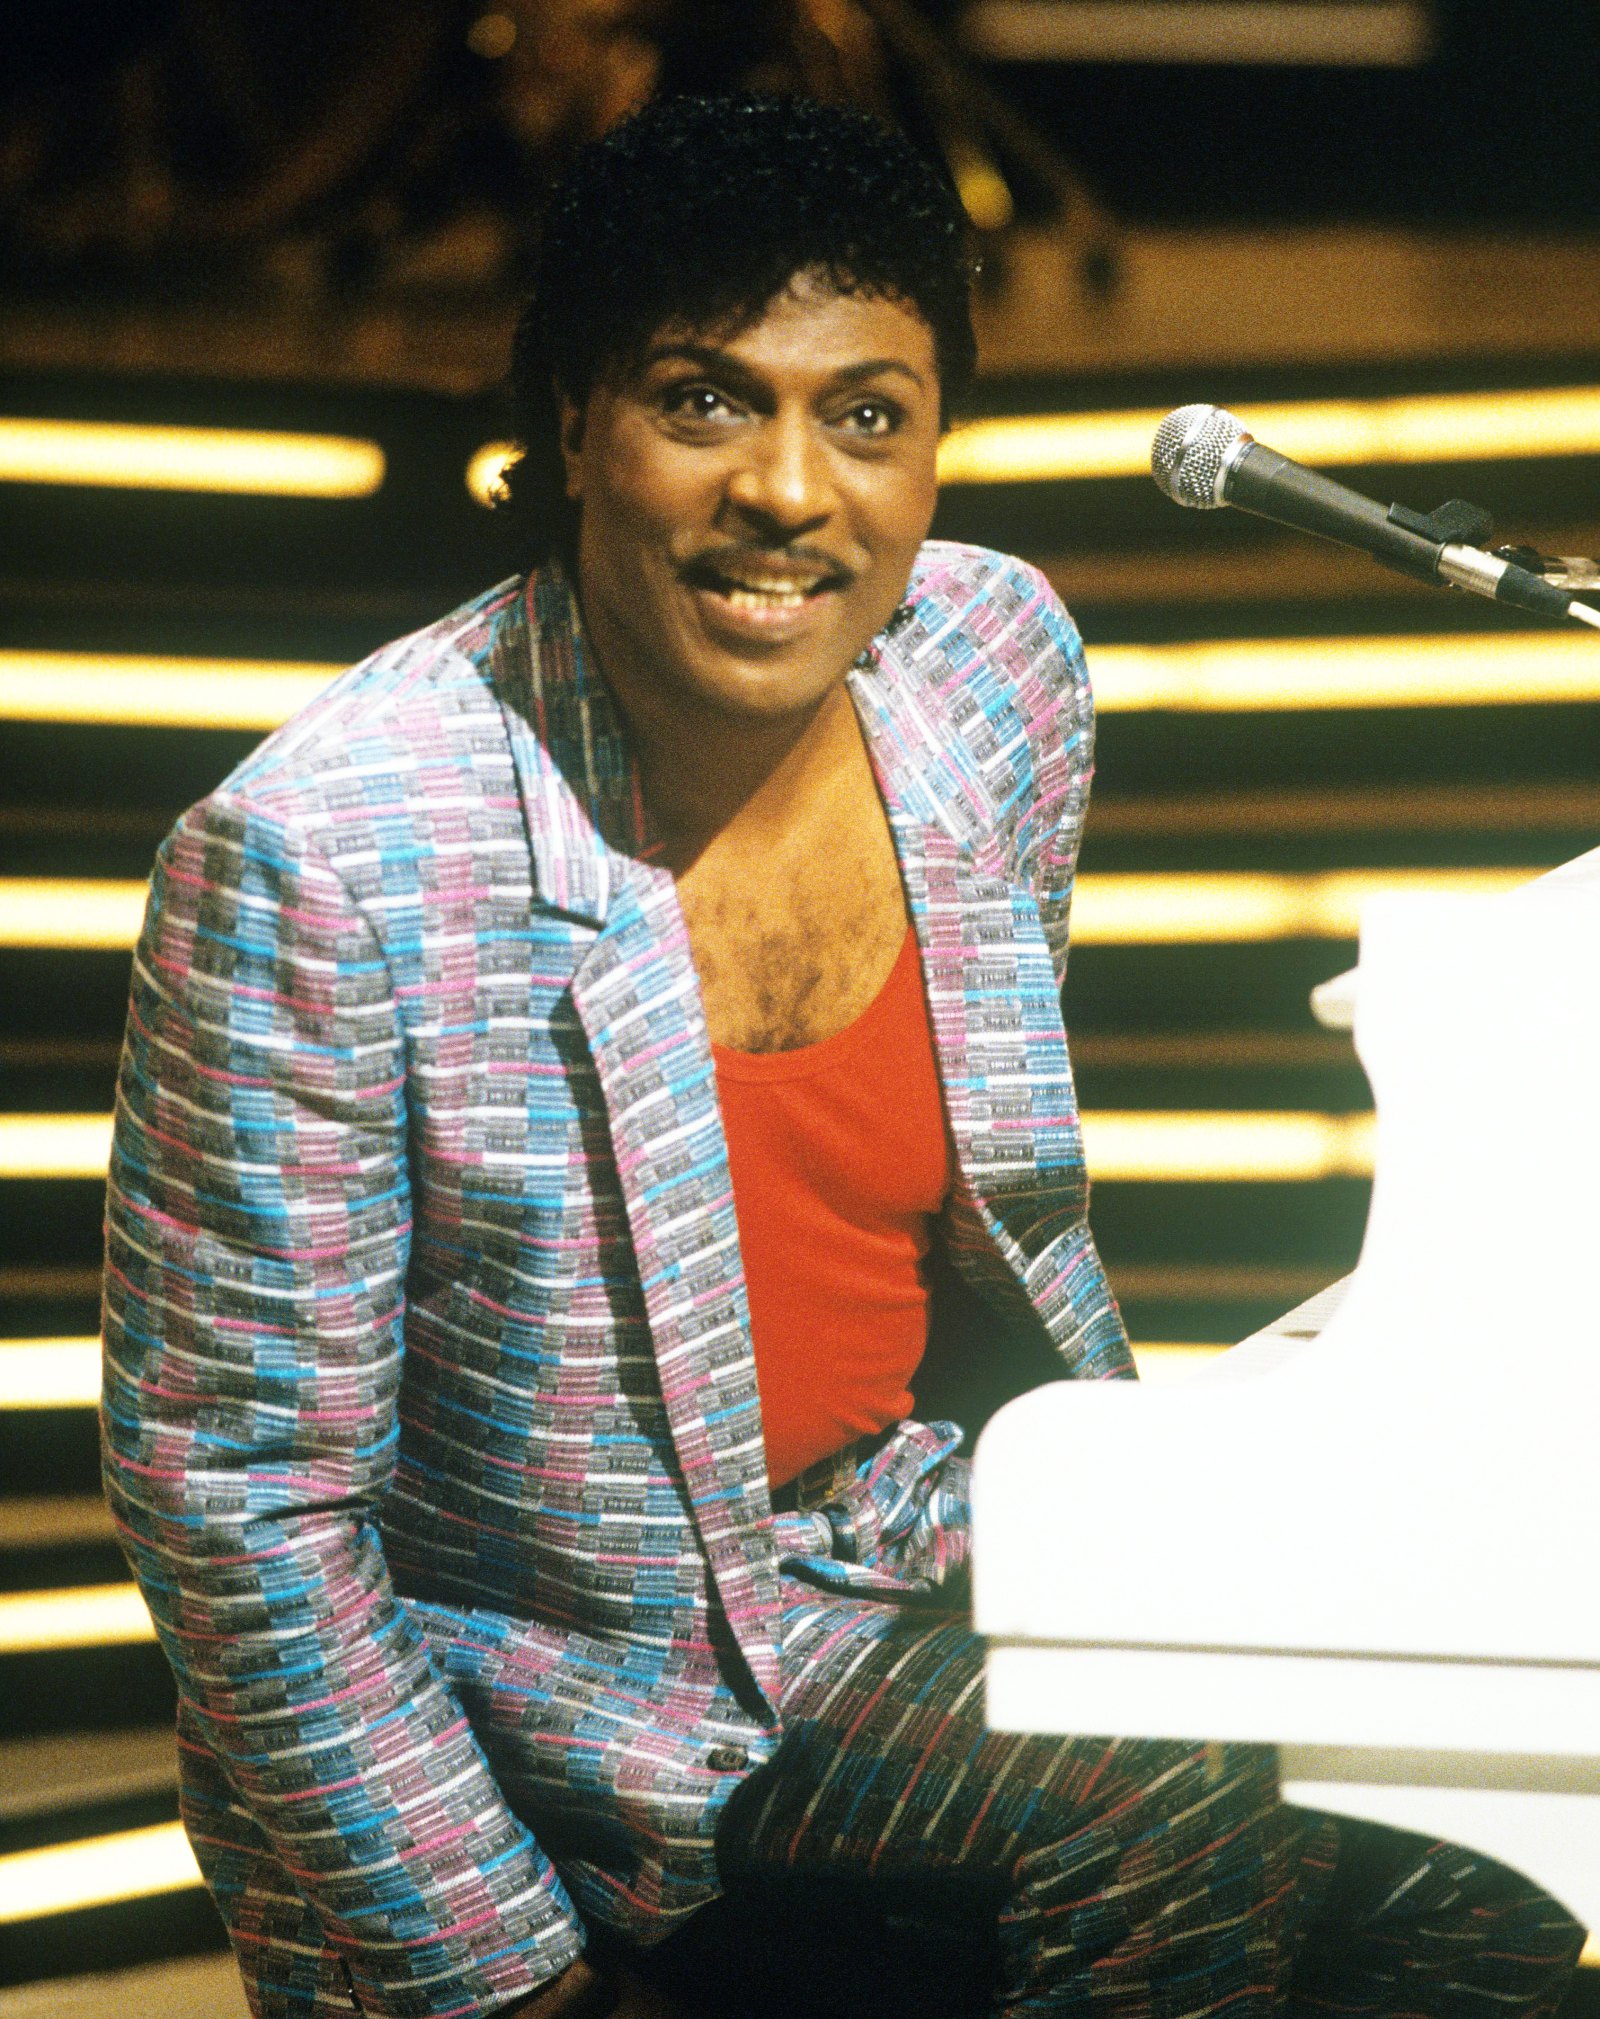 Little Richard Dead: Michelle Obama, Mick Jagger and More Stars Pay Tribute